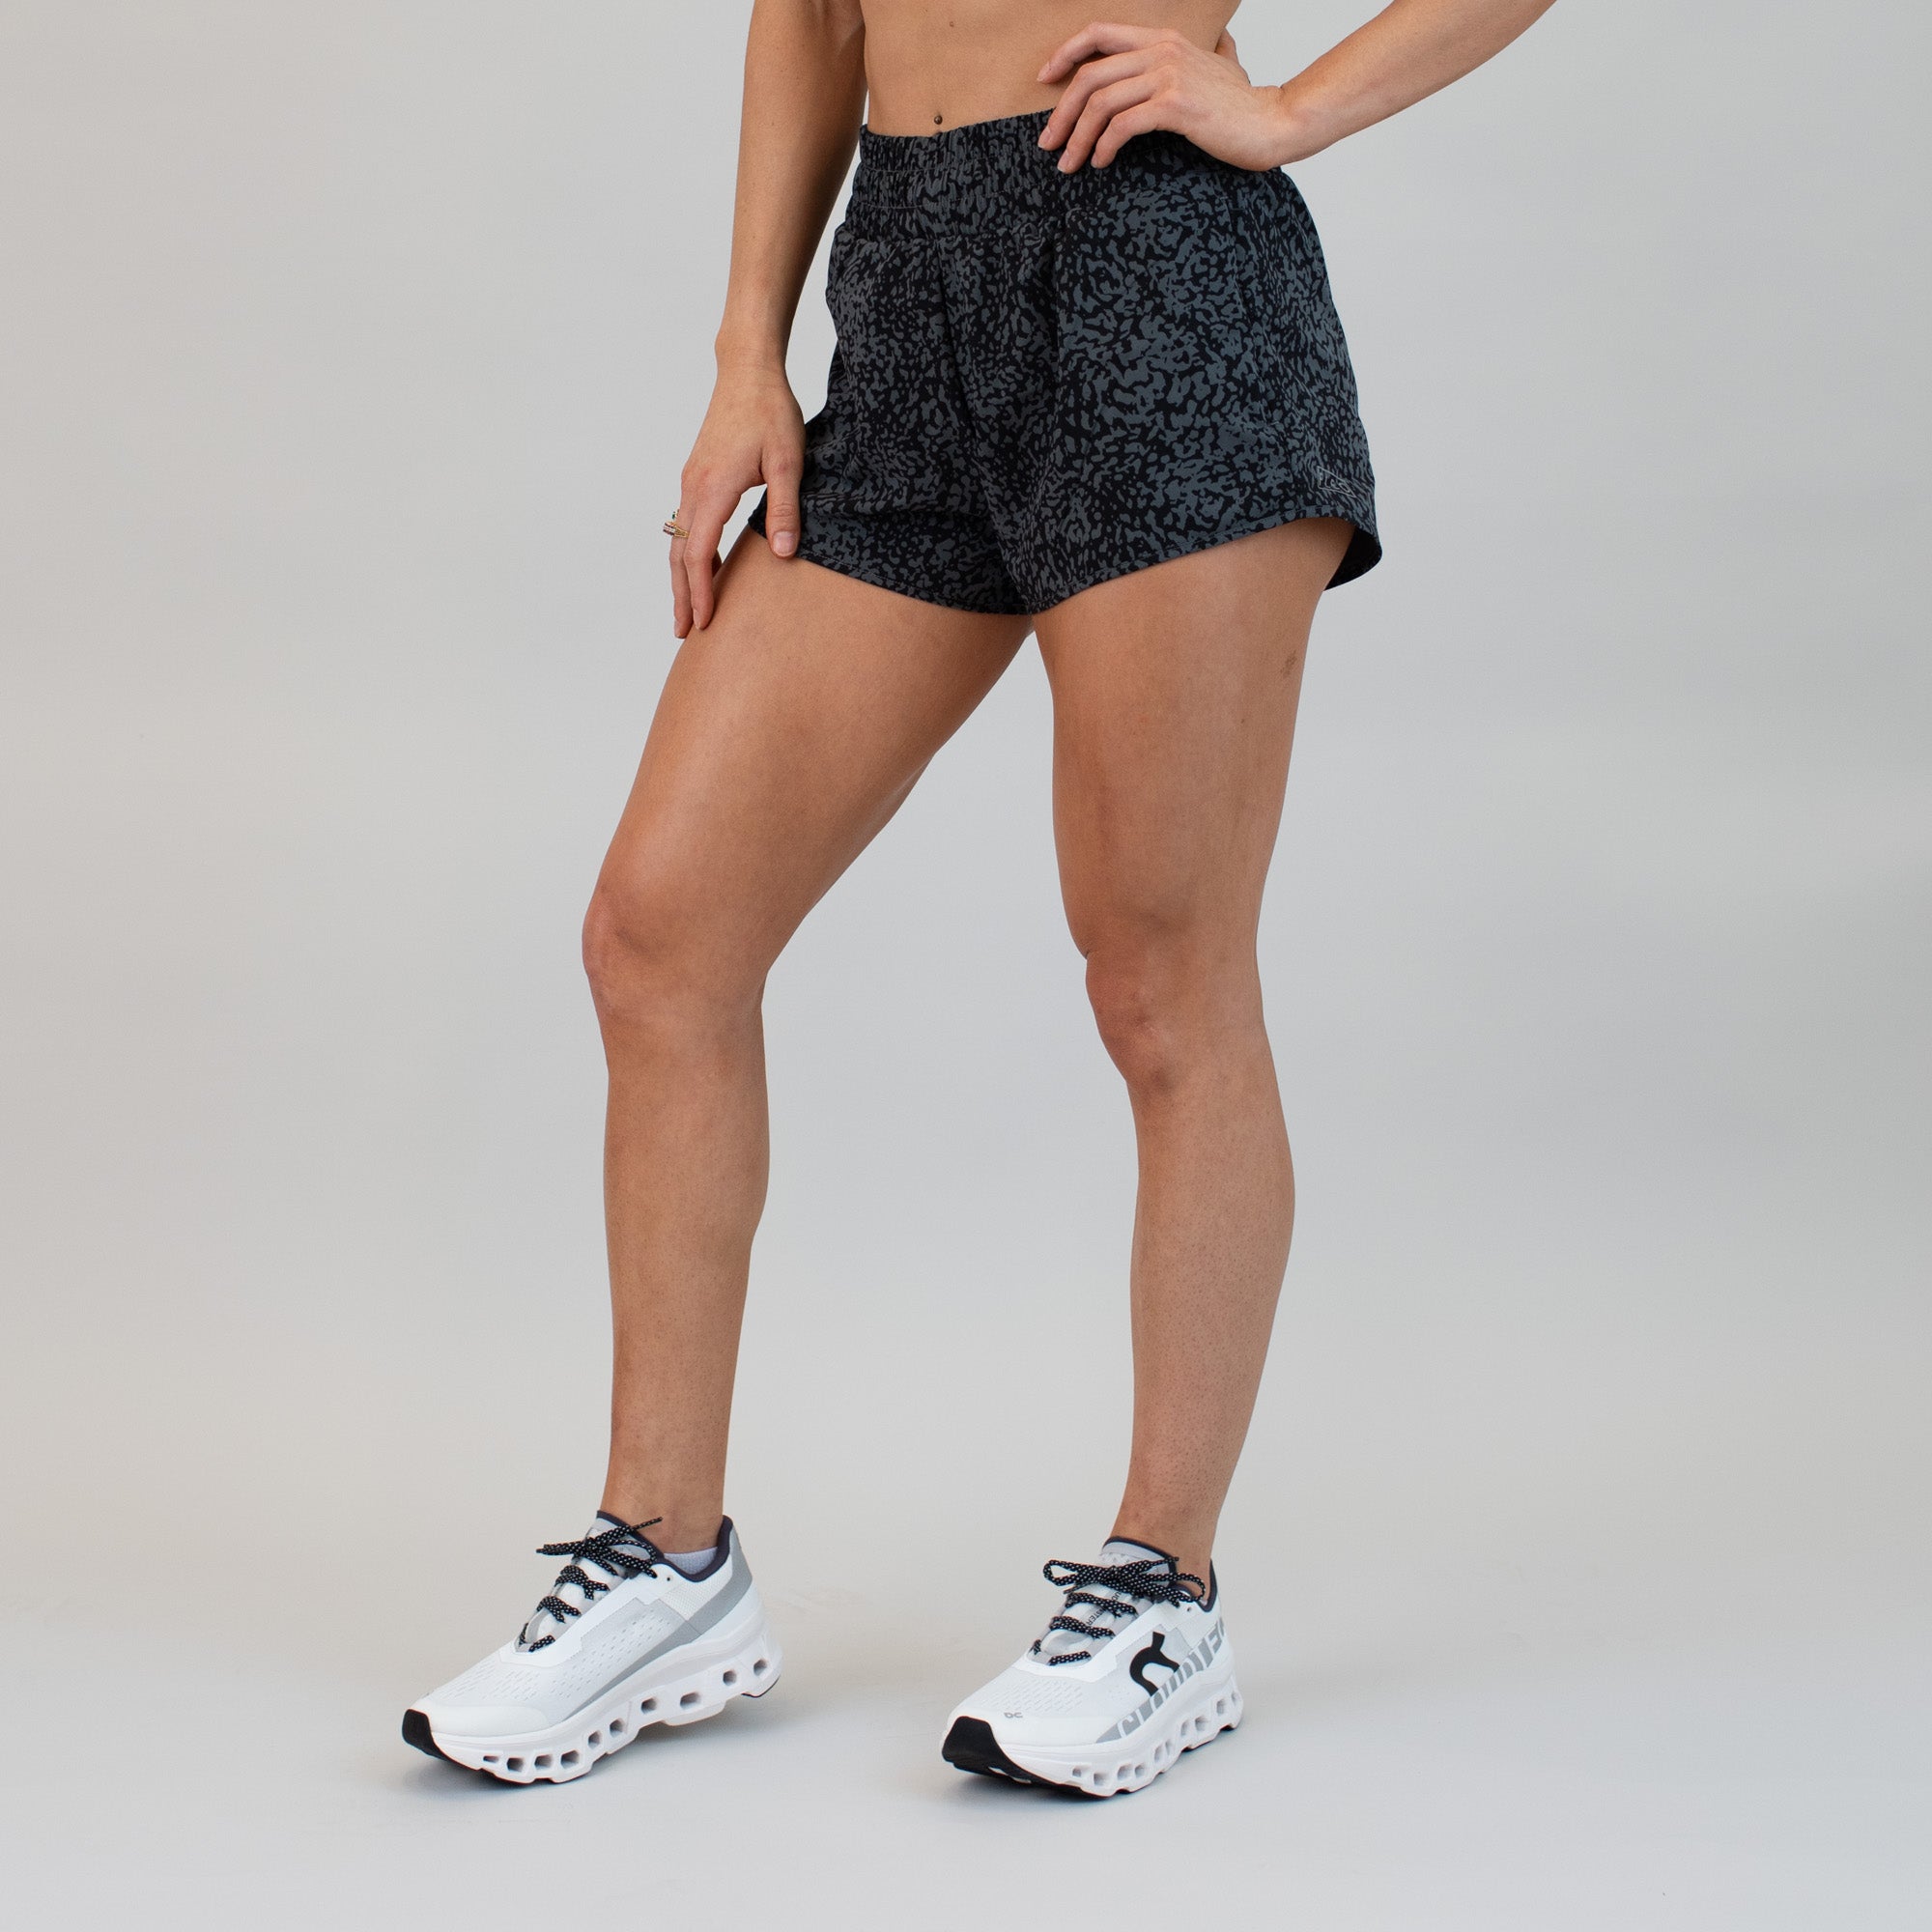 High Rise Keep Up Shorts - Gray Leopard